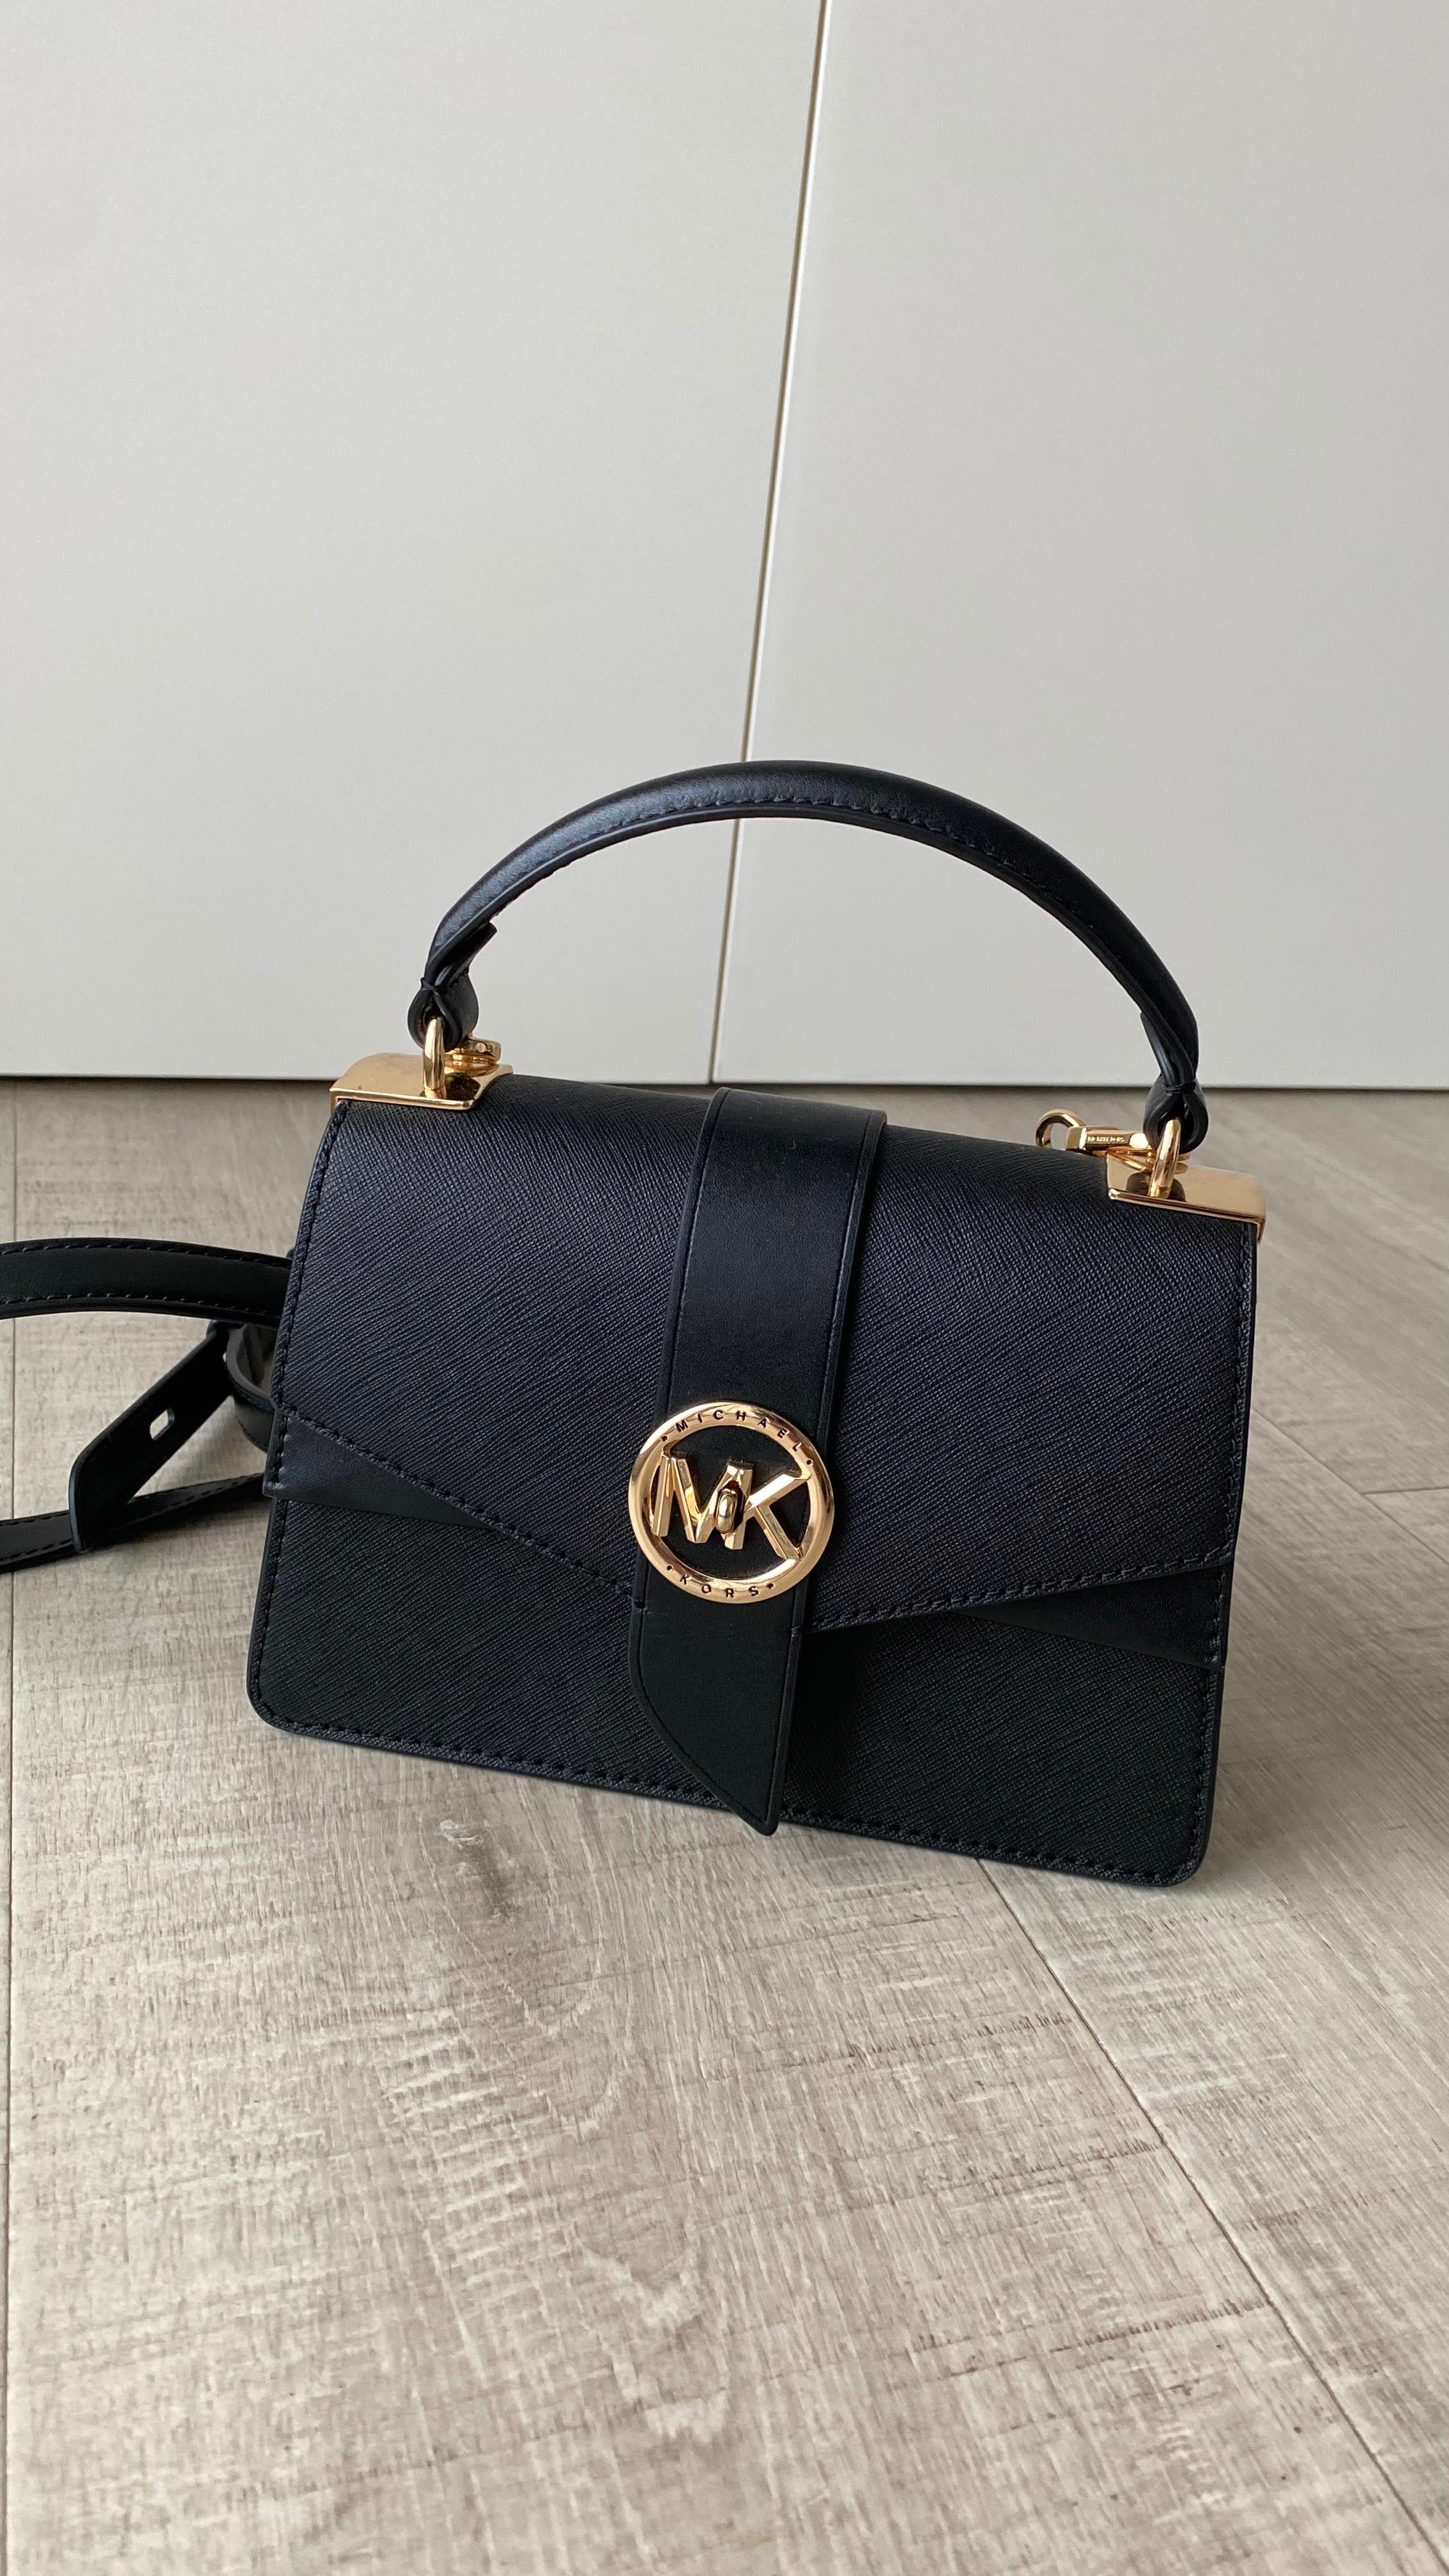 Michael Kors Greenwich small bag in a perfect condition